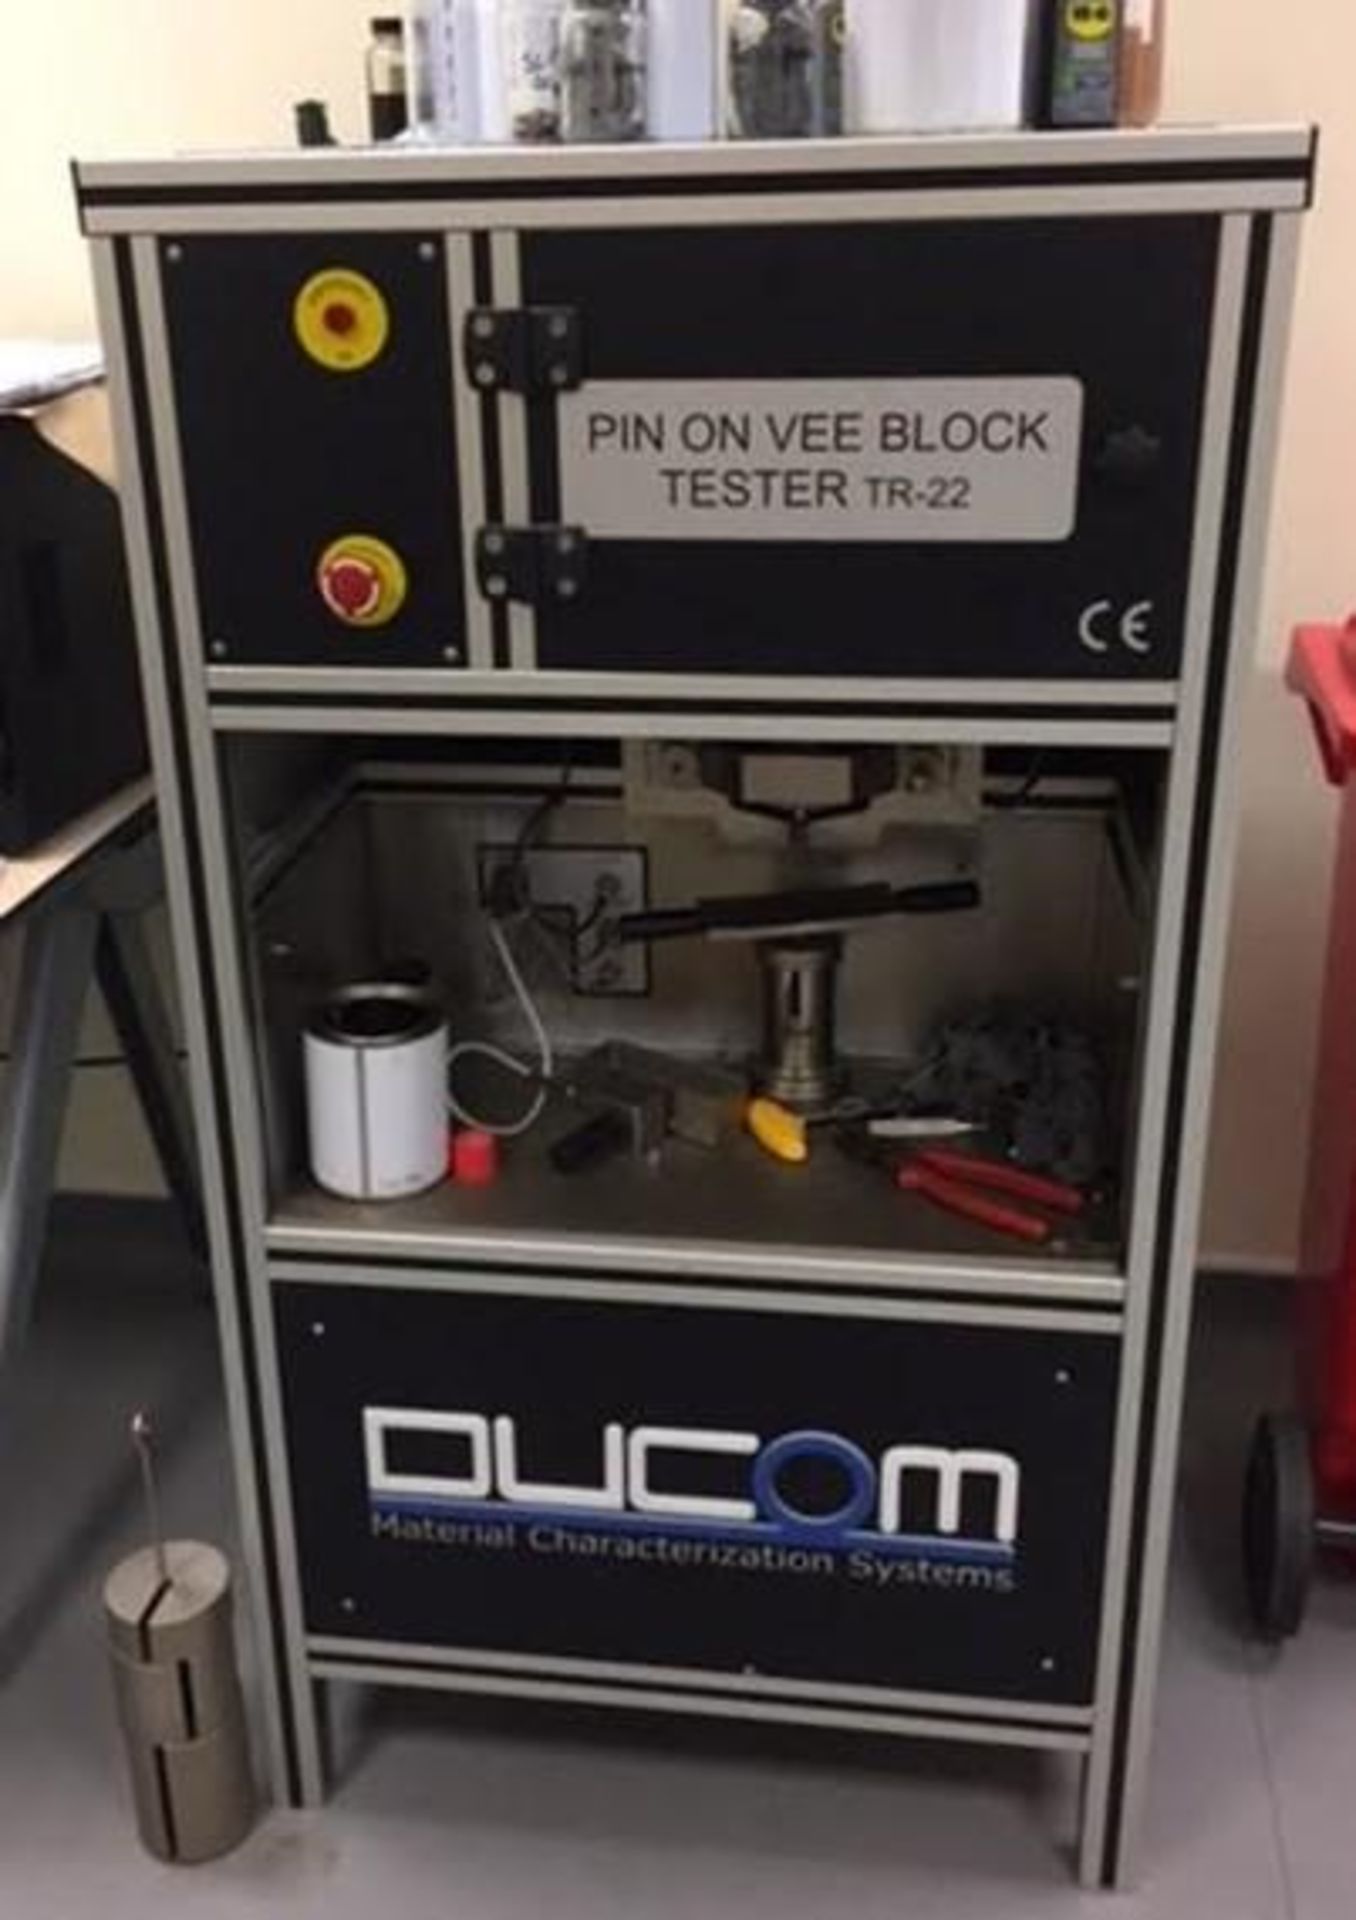 1 x Ducom TR22 Pin and Vee Block Tester - Used to Evaluate Wear Preventive and Load Carrying - Image 3 of 9